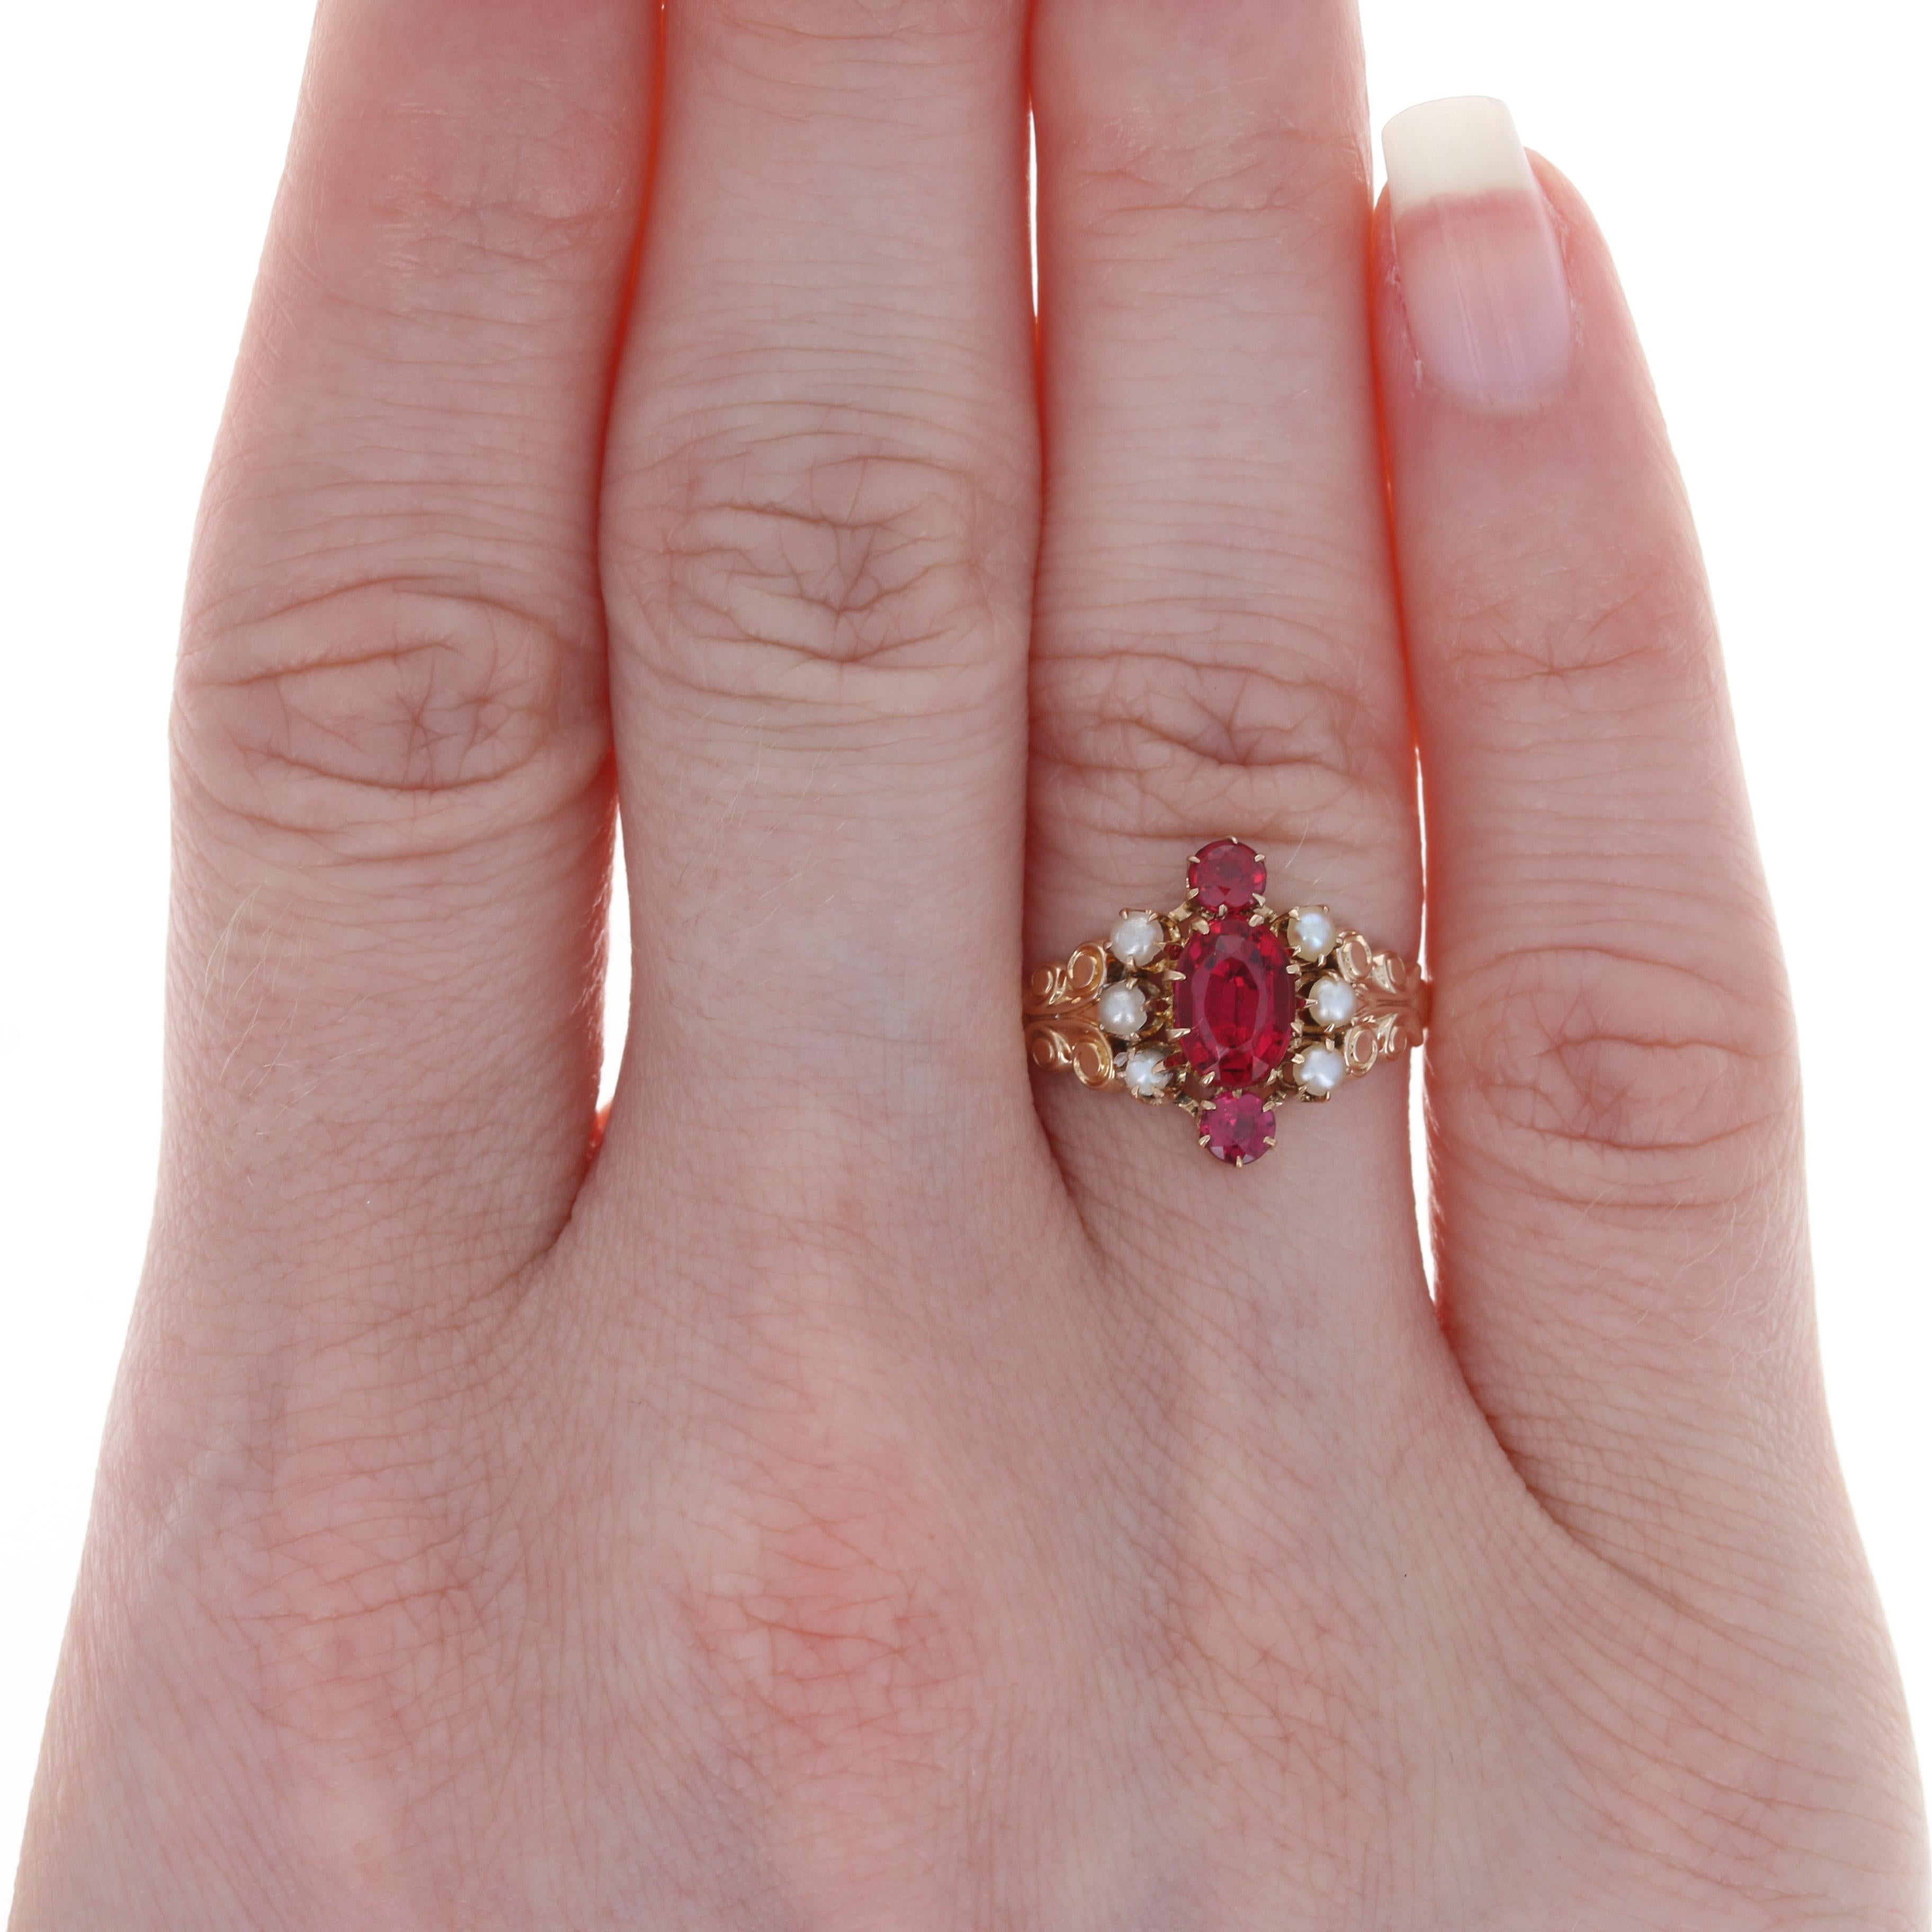 Size: 6
 Sizing Fee: Up 2 sizes or down 1 size for $25
 
 Era: Victorian 1880s - 1890s
 
 Metal Content: 10k Rose Gold 
 
 Stone Information: 
 Genuine Garnet / Glass Doublets
 Cuts: Oval & Round
 Color: Red
 Solitaire's Size: 7.1mm X 5mm
 
 Genuine